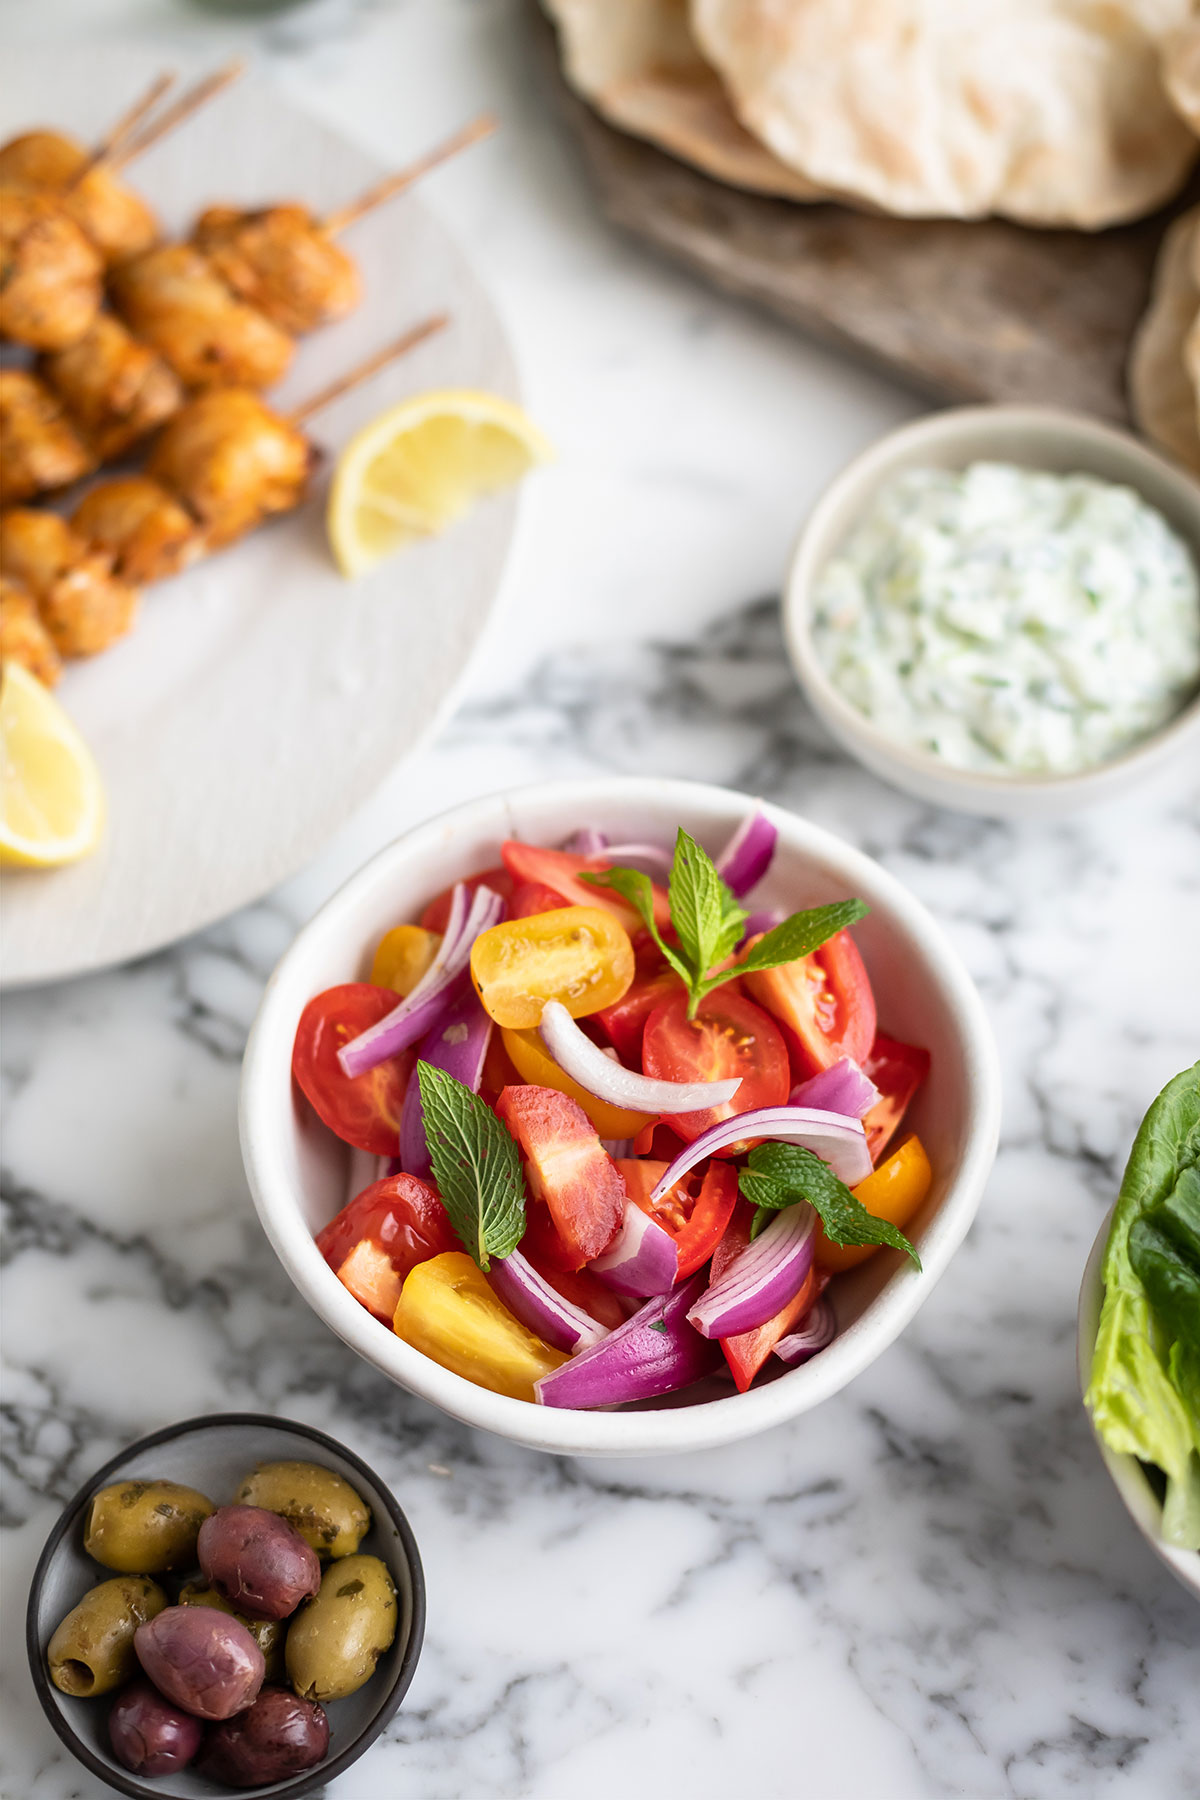 A simple salad for Greek chicken kebabs in an Air fryer recipe